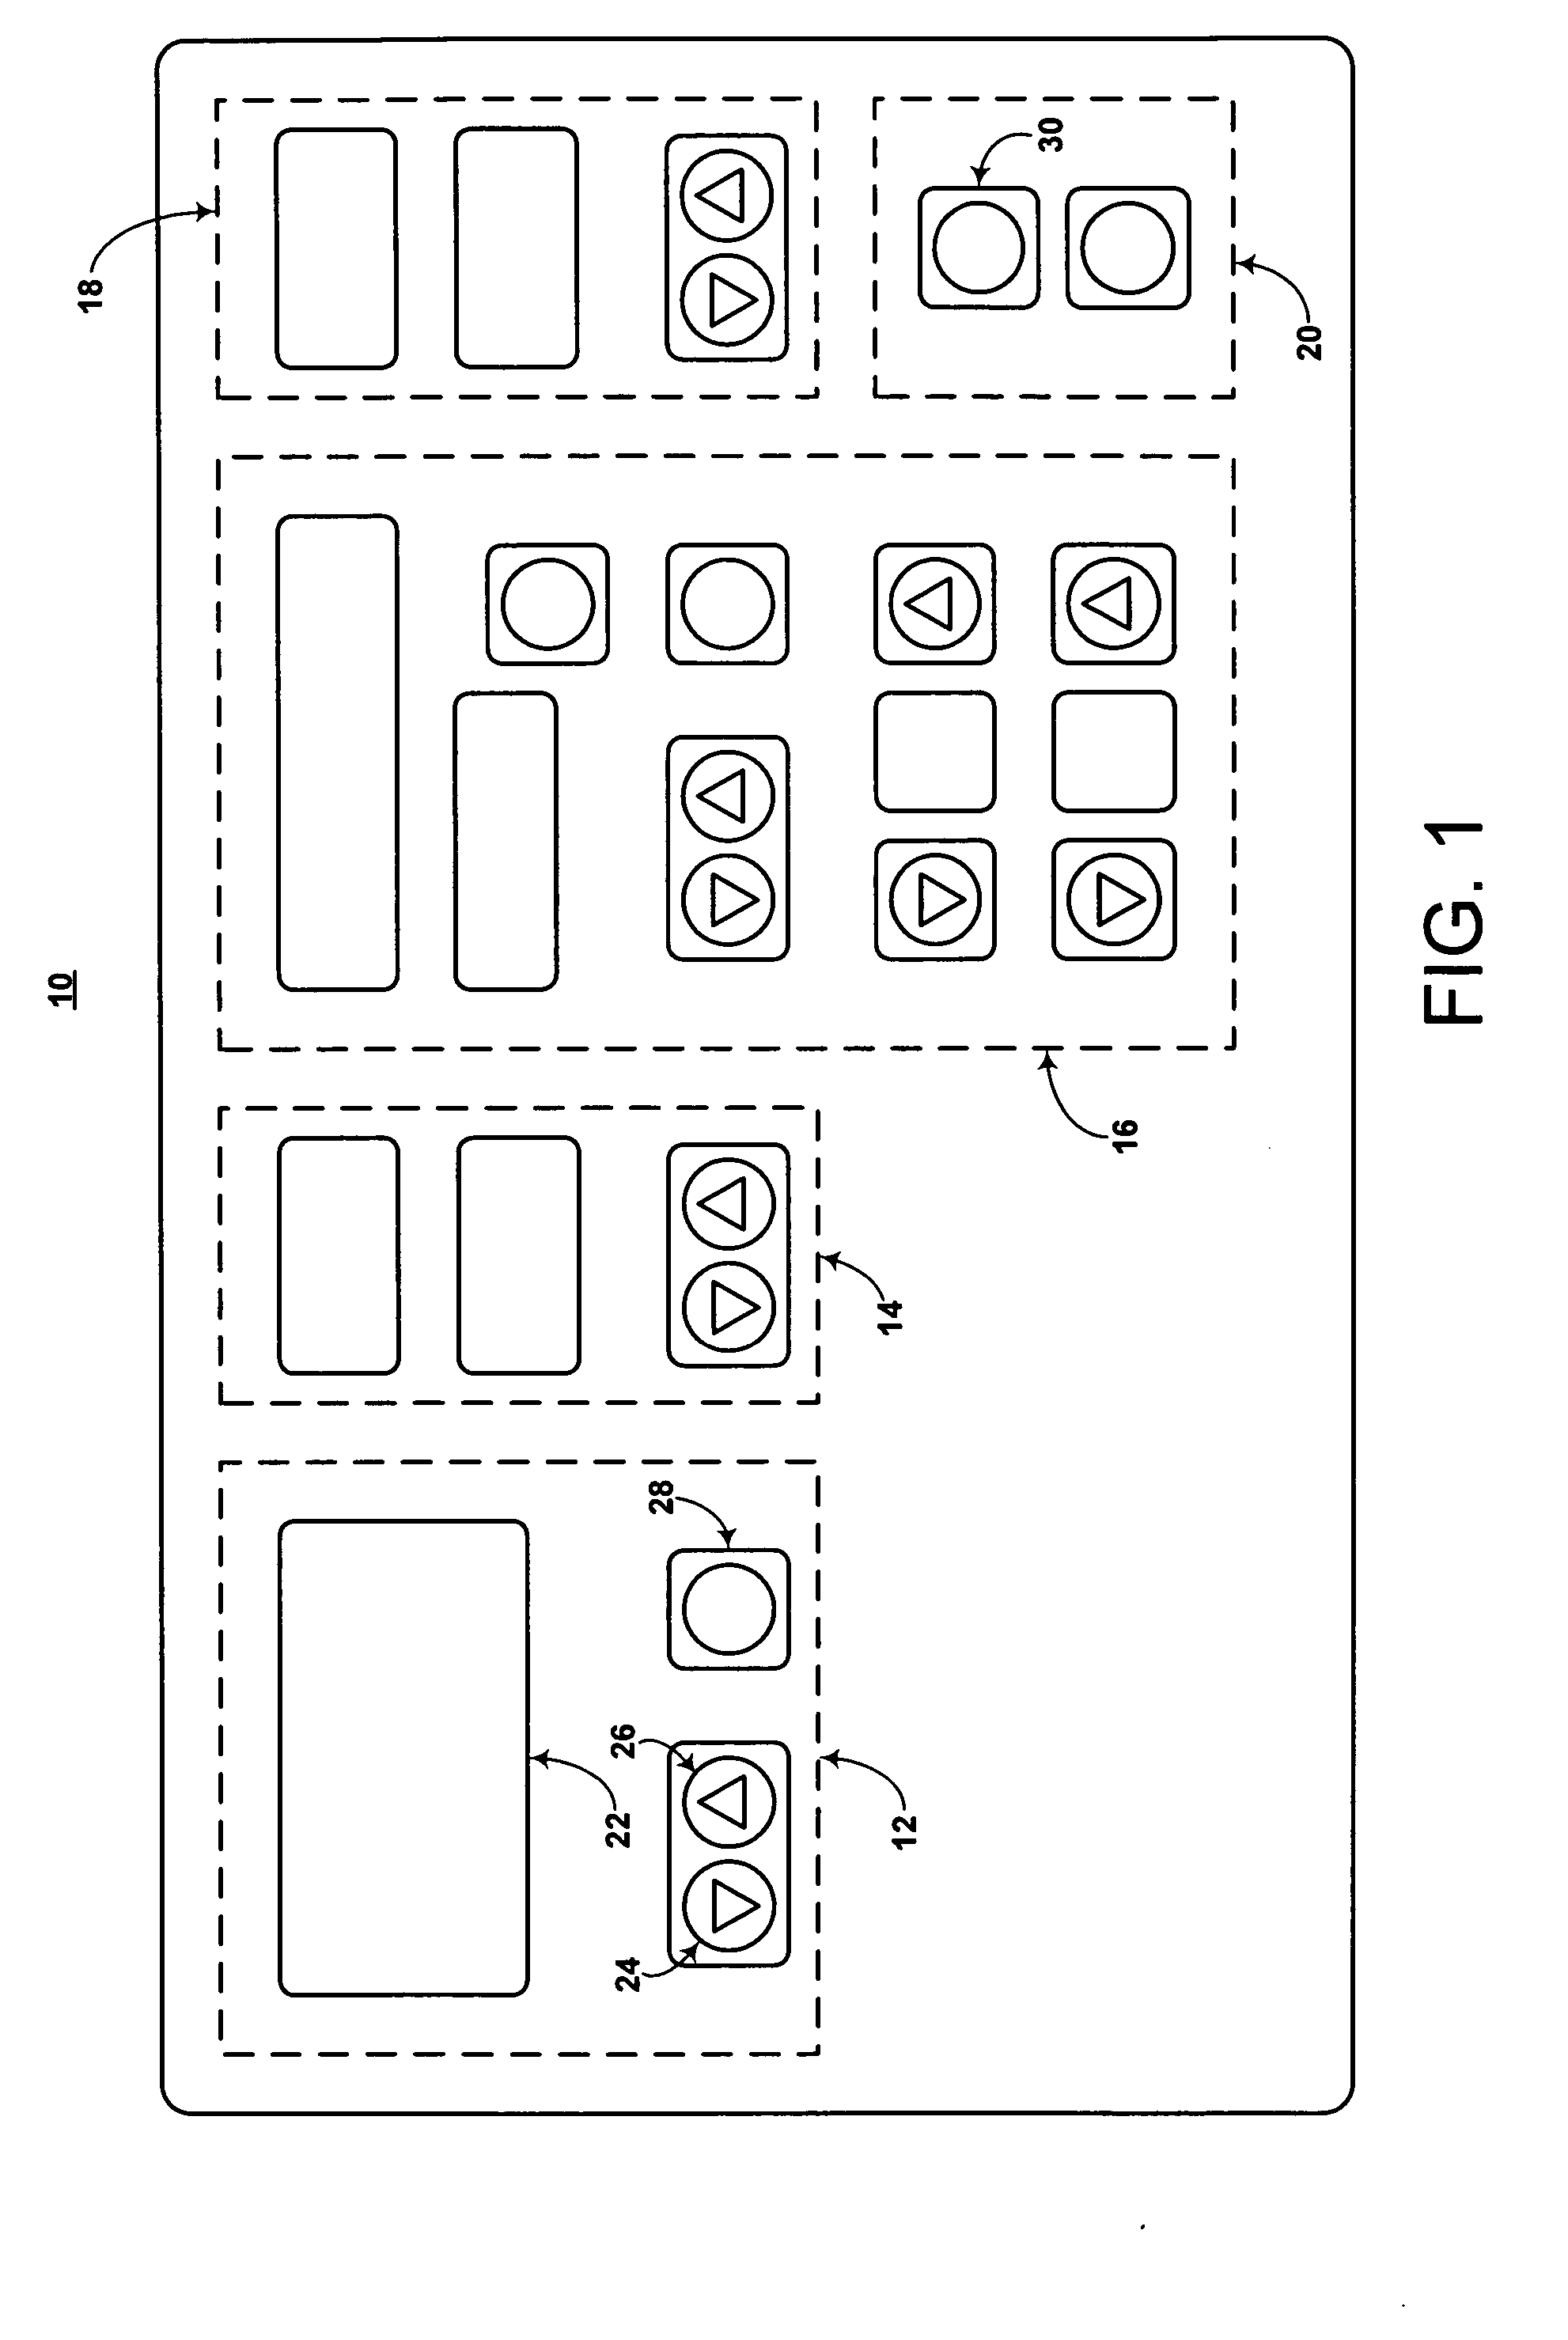 Rotor selection interface and method